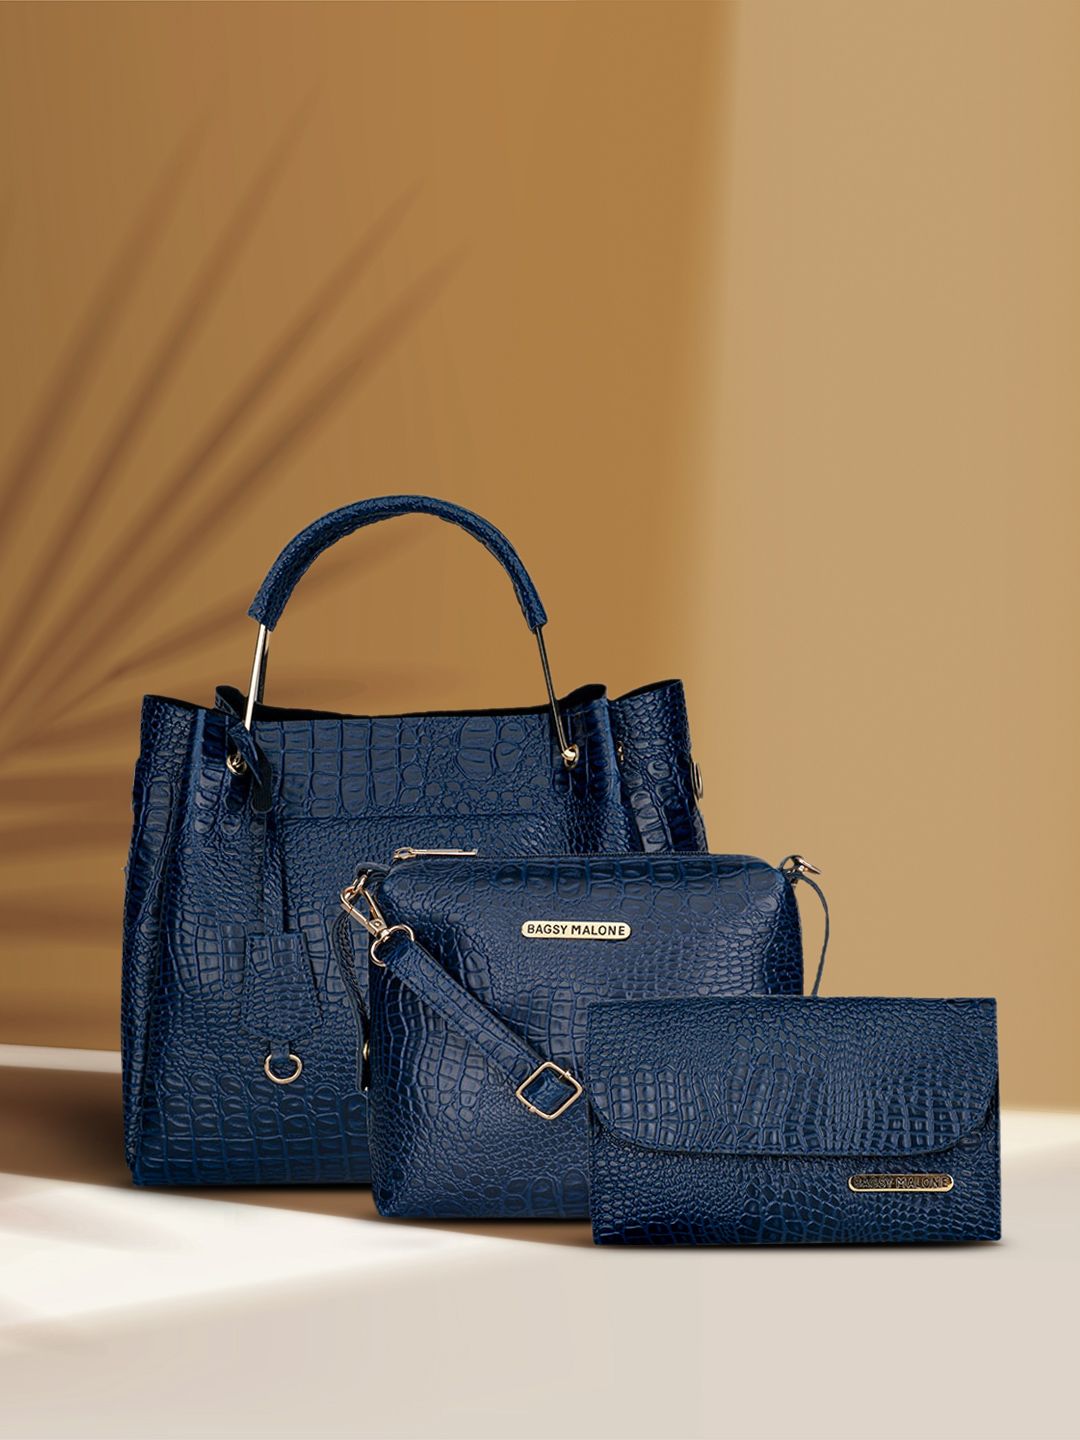 Bagsy Malone Blue Textured Handheld Bag Price in India